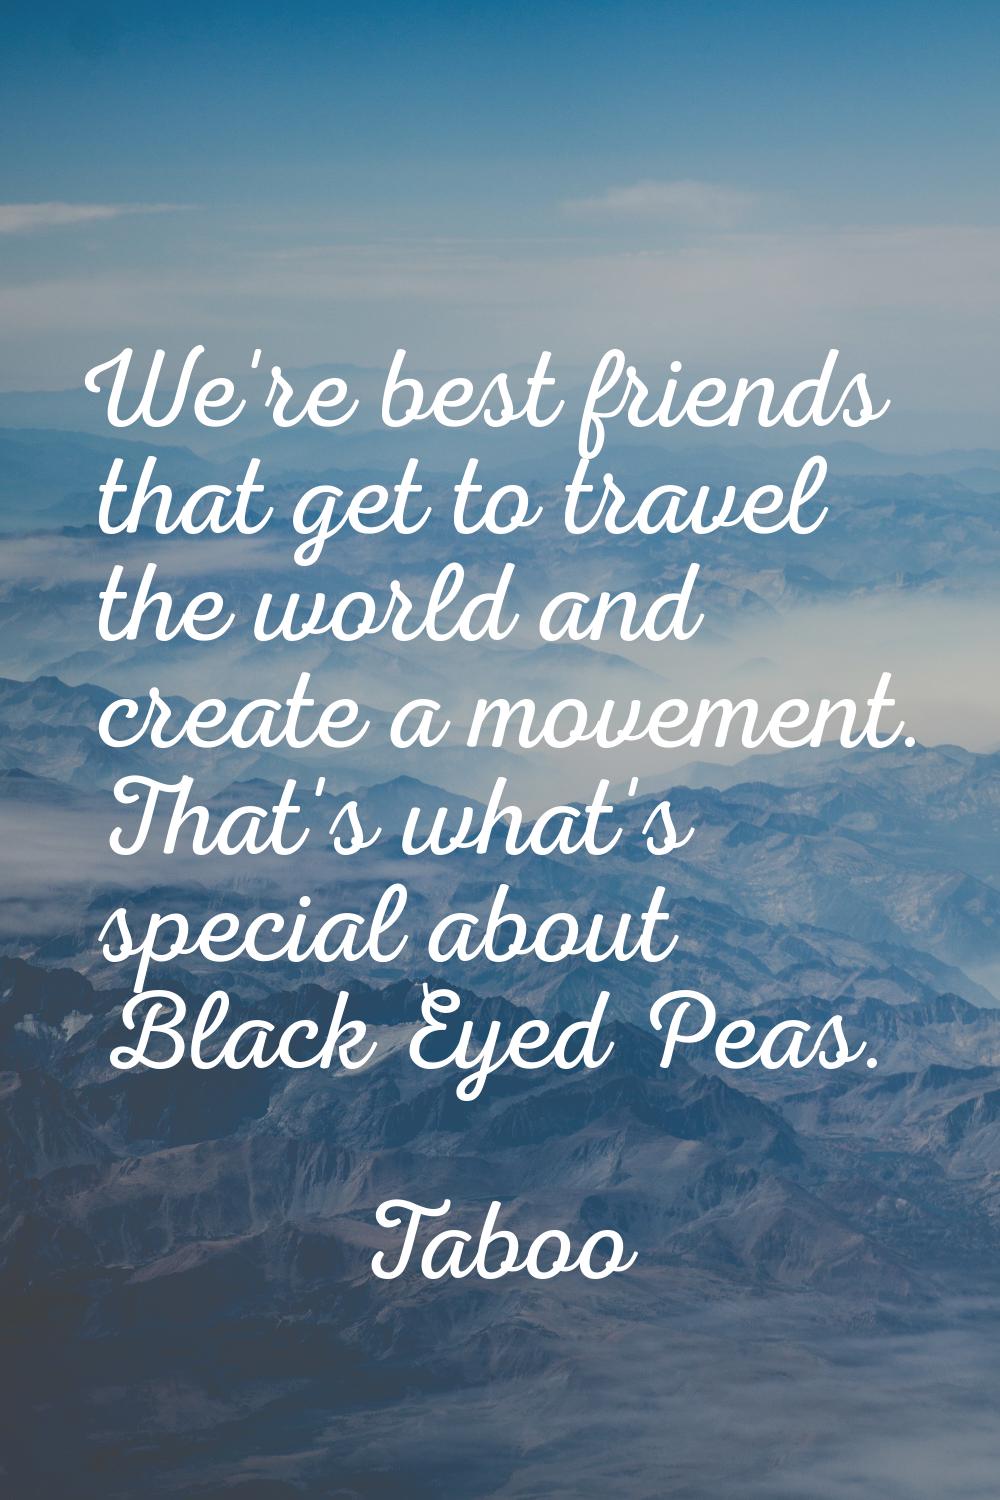 We're best friends that get to travel the world and create a movement. That's what's special about 